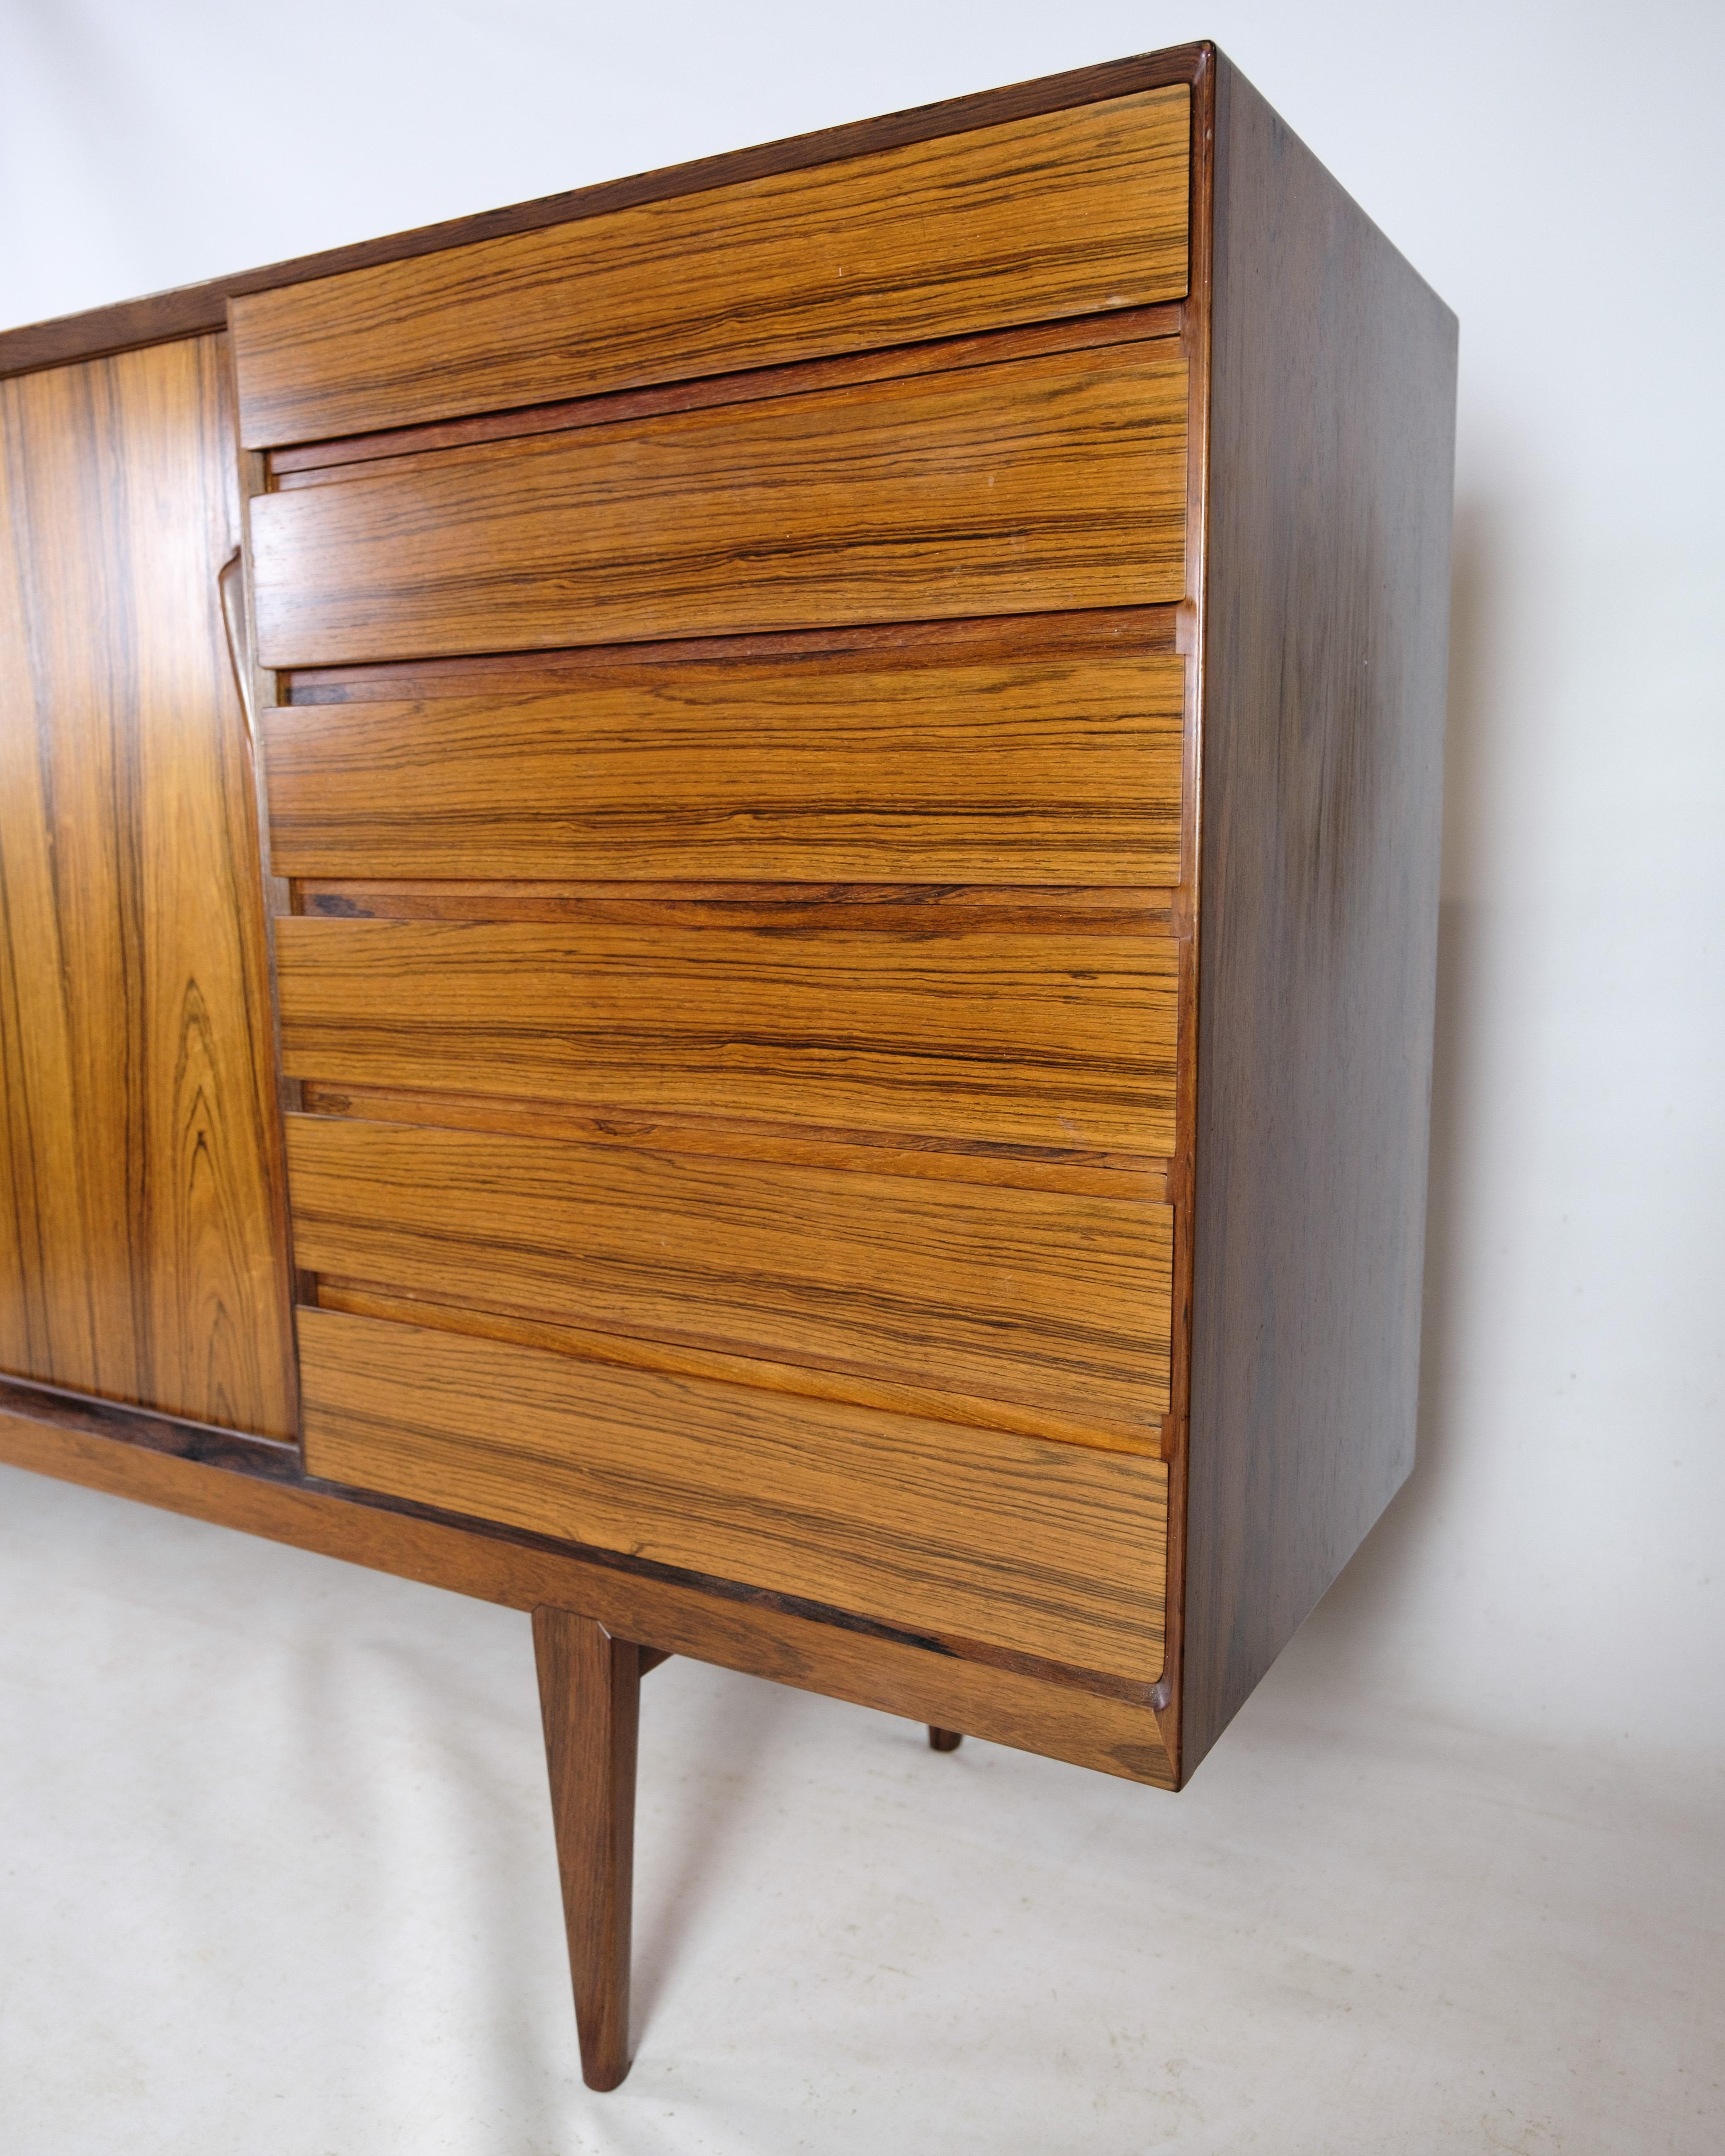 Danish Sideboard In Rosewood Designed By Henry R. Hansen, By Brande Factory From 1960s For Sale